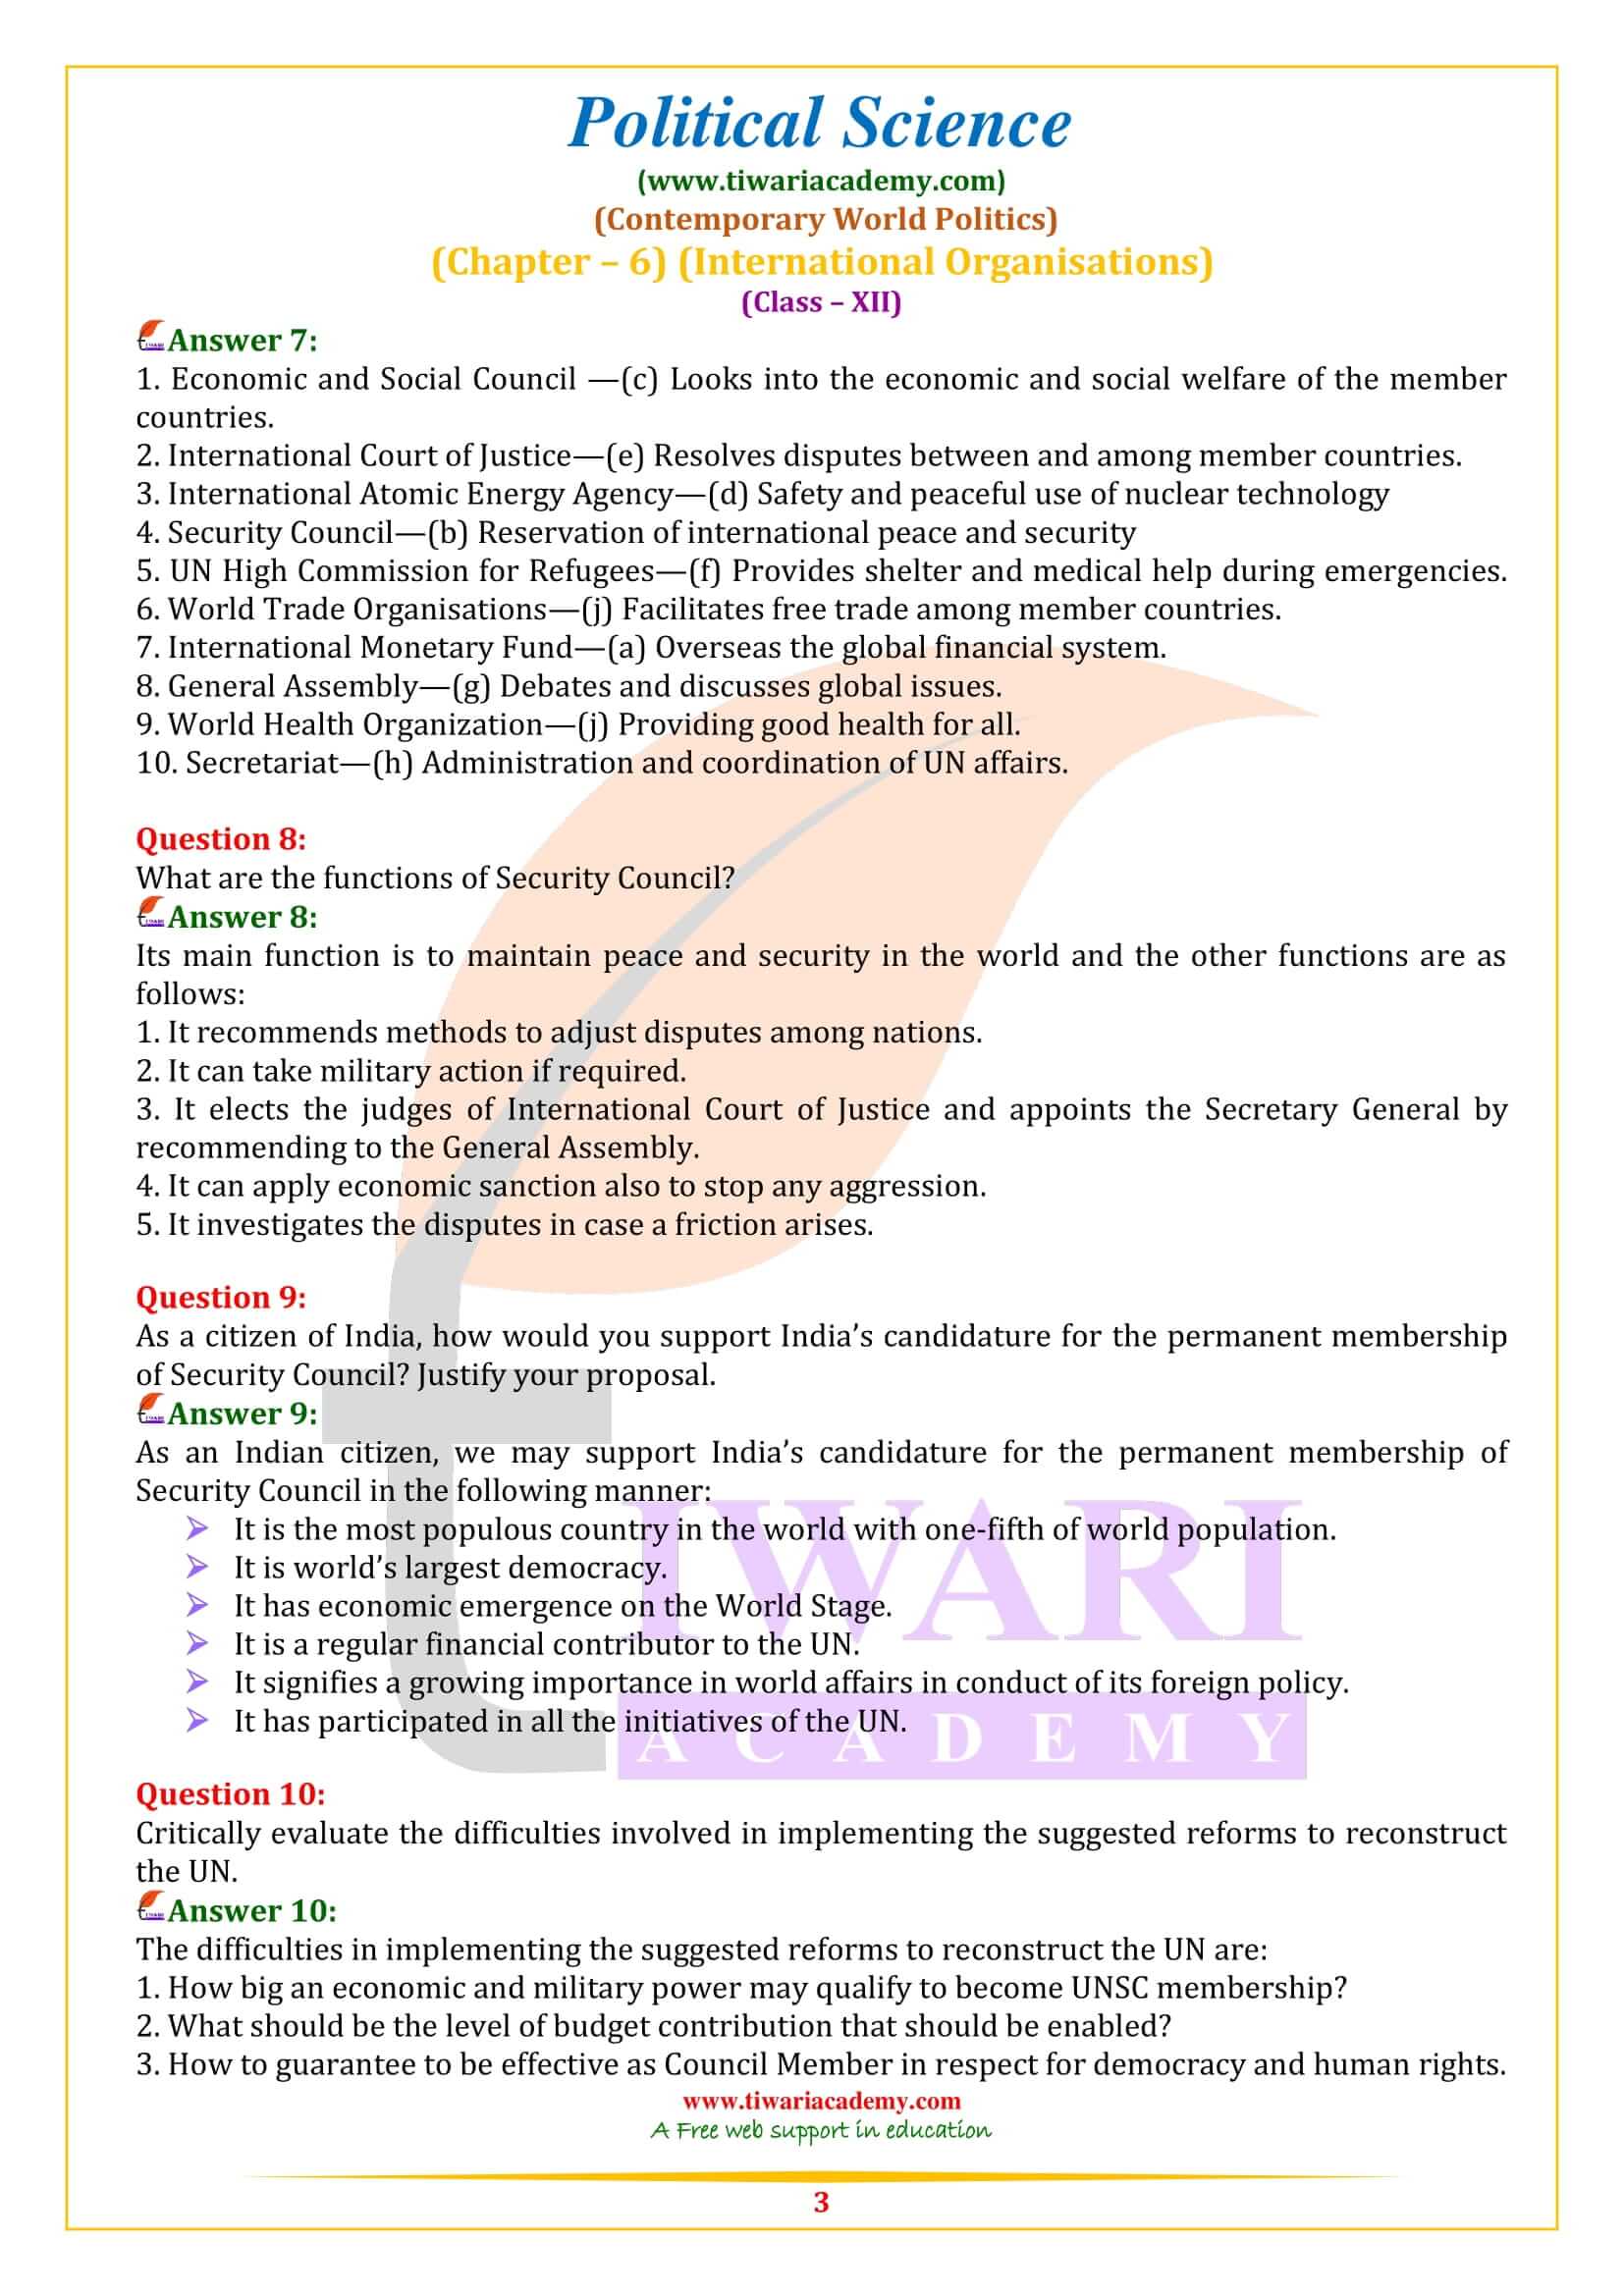 NCERT Solutions for Class 12 Political Science Chapter 6 in English Medium